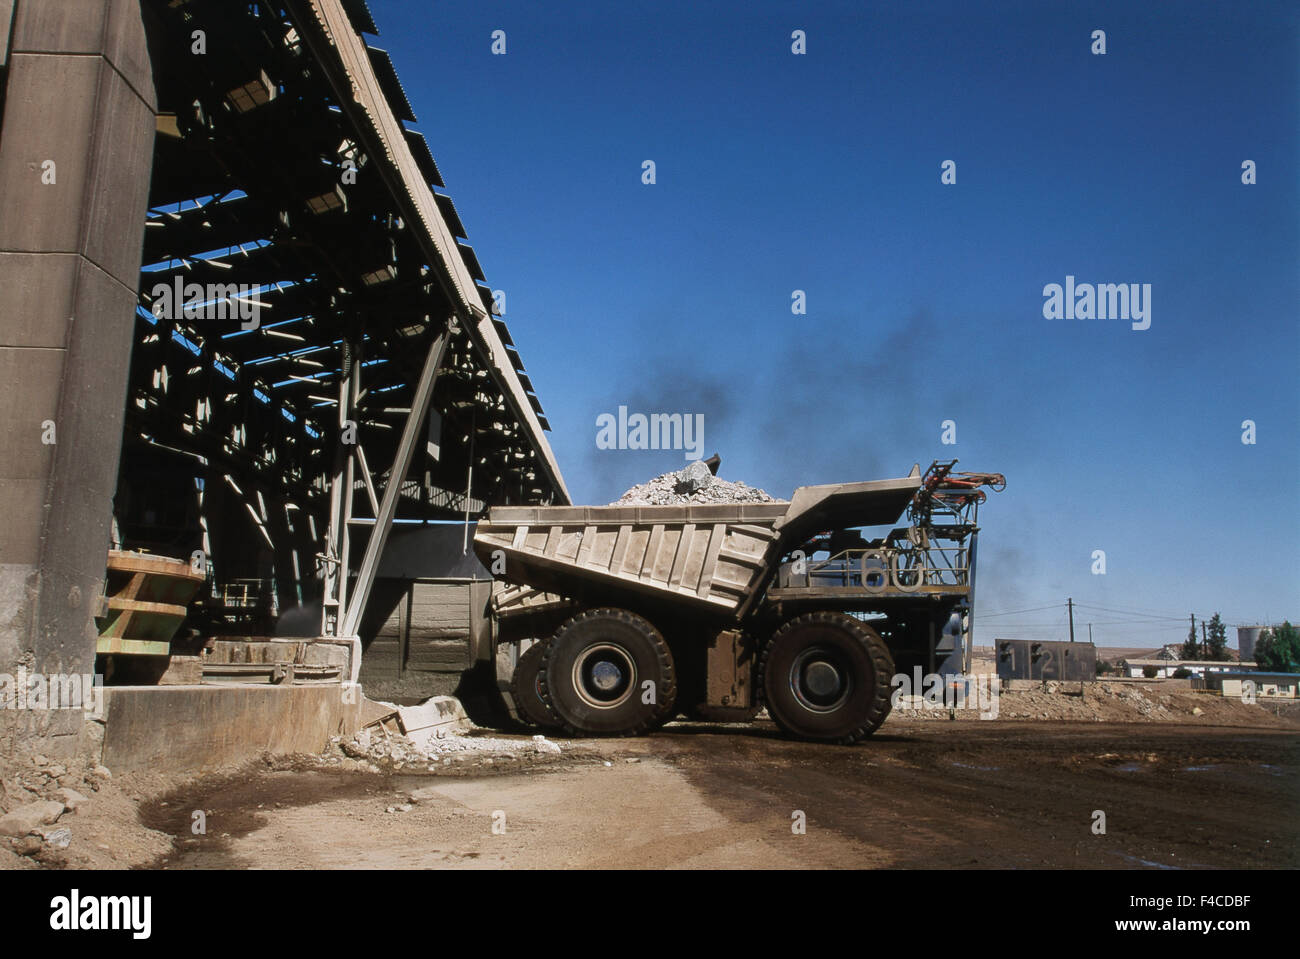 Namibia, Haul truck at the world's largest open-pit uranium mine. (Large format sizes available) Stock Photo